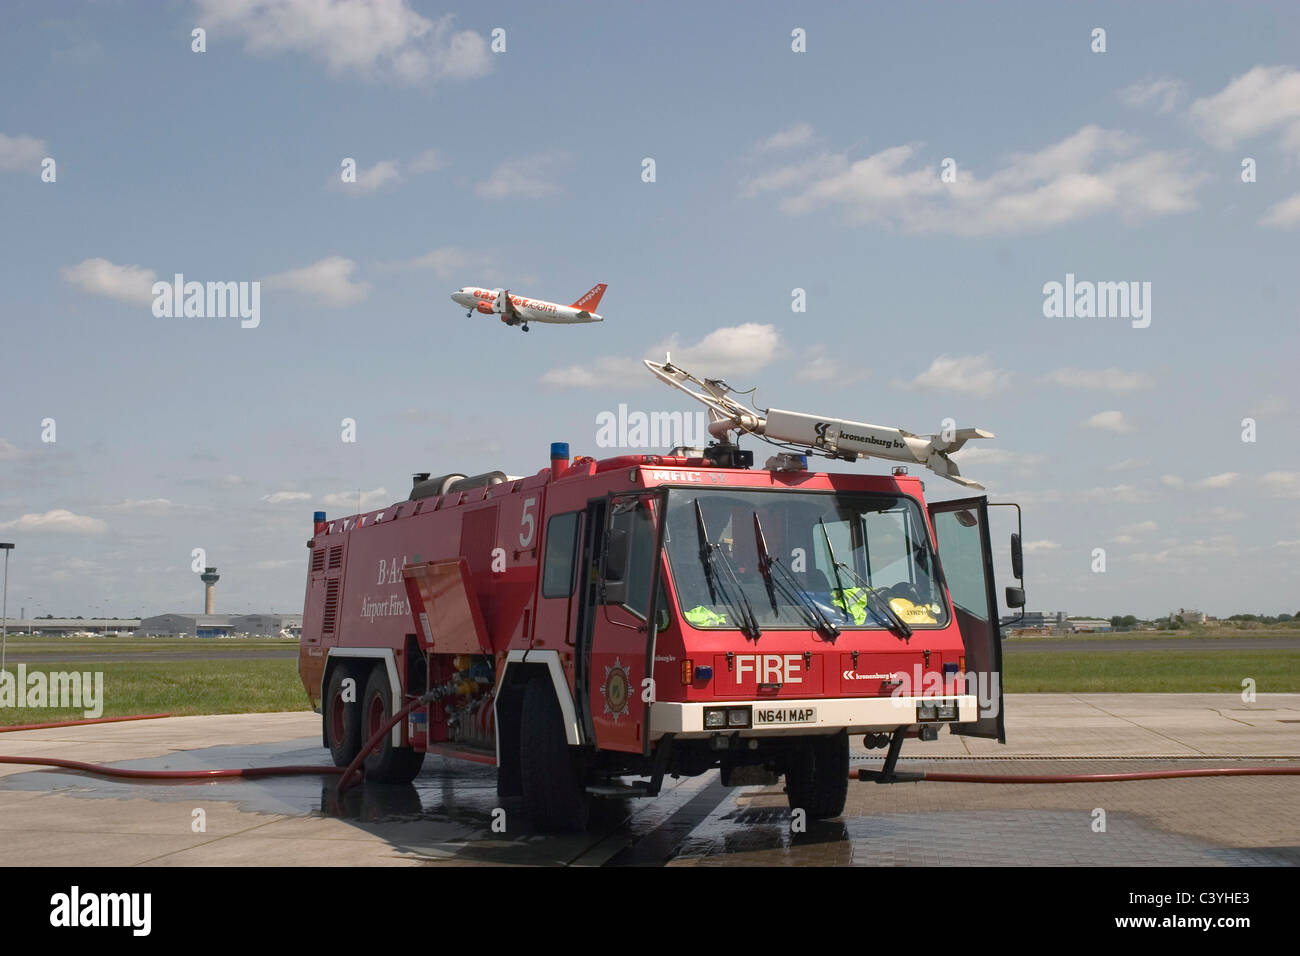 Airport fire engine with plane flying overhead Stock Photo